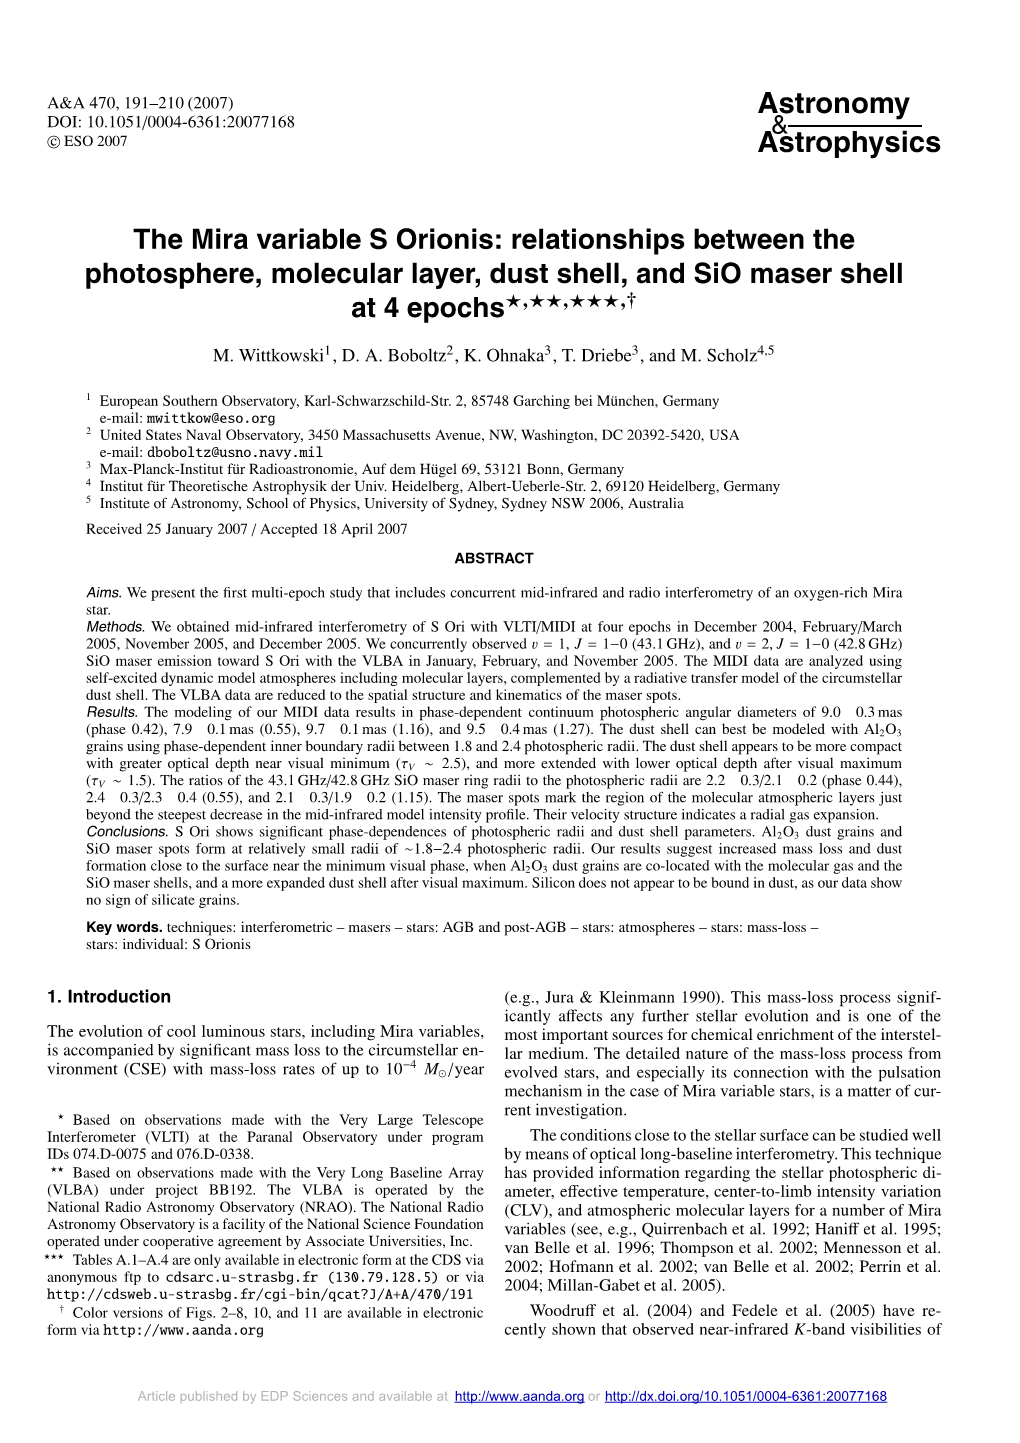 The Mira Variable S Orionis: Relationships Between the Photosphere, Molecular Layer, Dust Shell, and Sio Maser Shell at 4 Epochs�,��,���,†